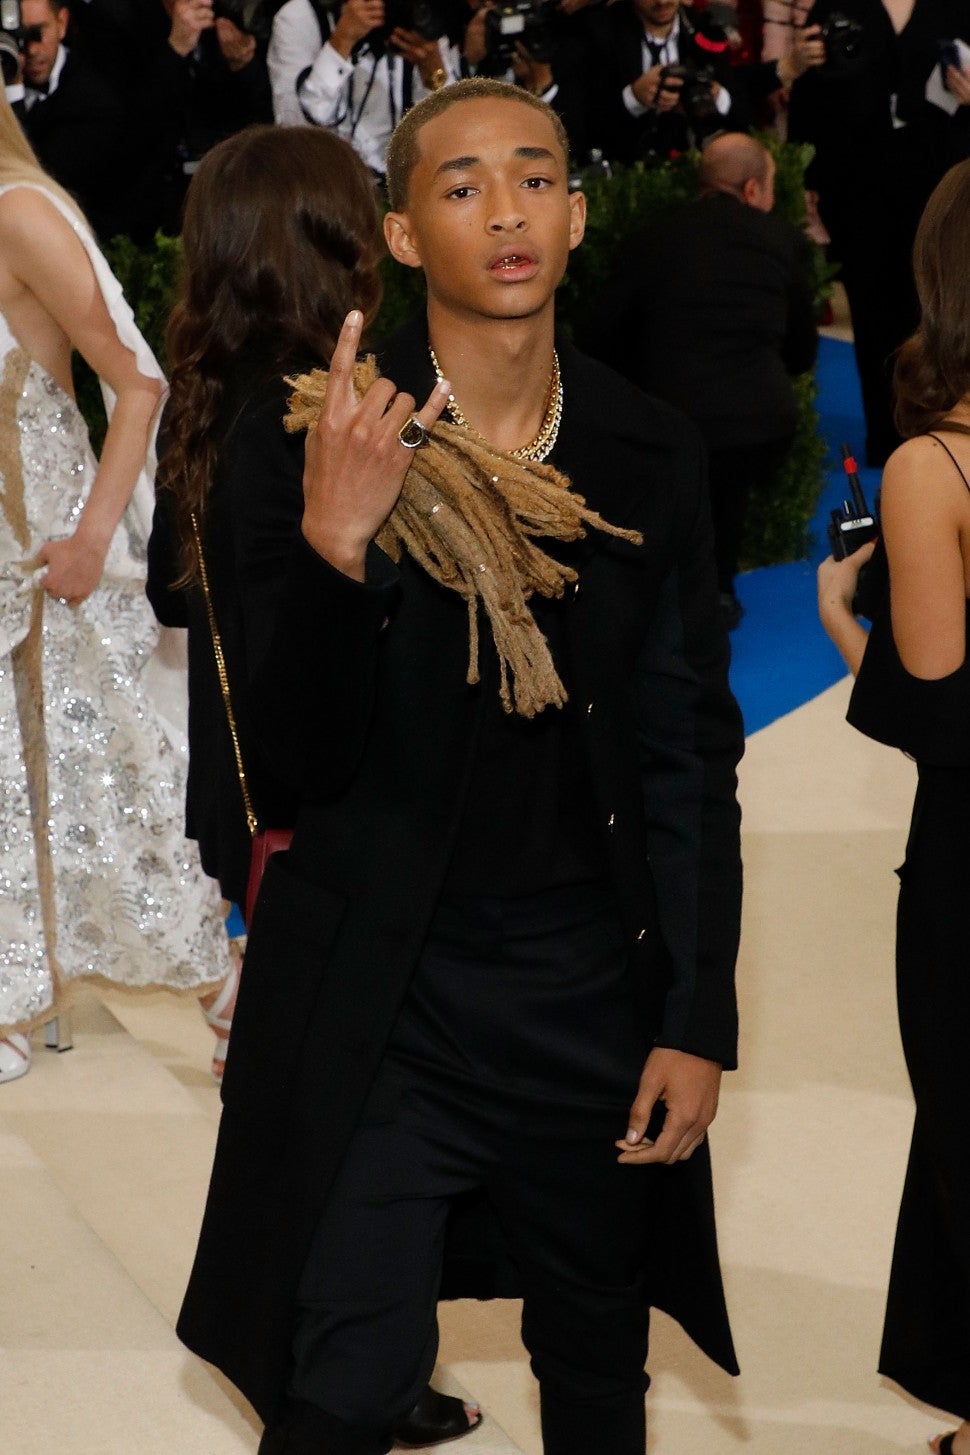 Jaden Smith attends "Rei Kawakubo/Commes Des Garcons: Art of the In-Between", the 2017 Costume Institute Benefit at Metropolitan Museum of Art on May 1, 2017 in New York City.